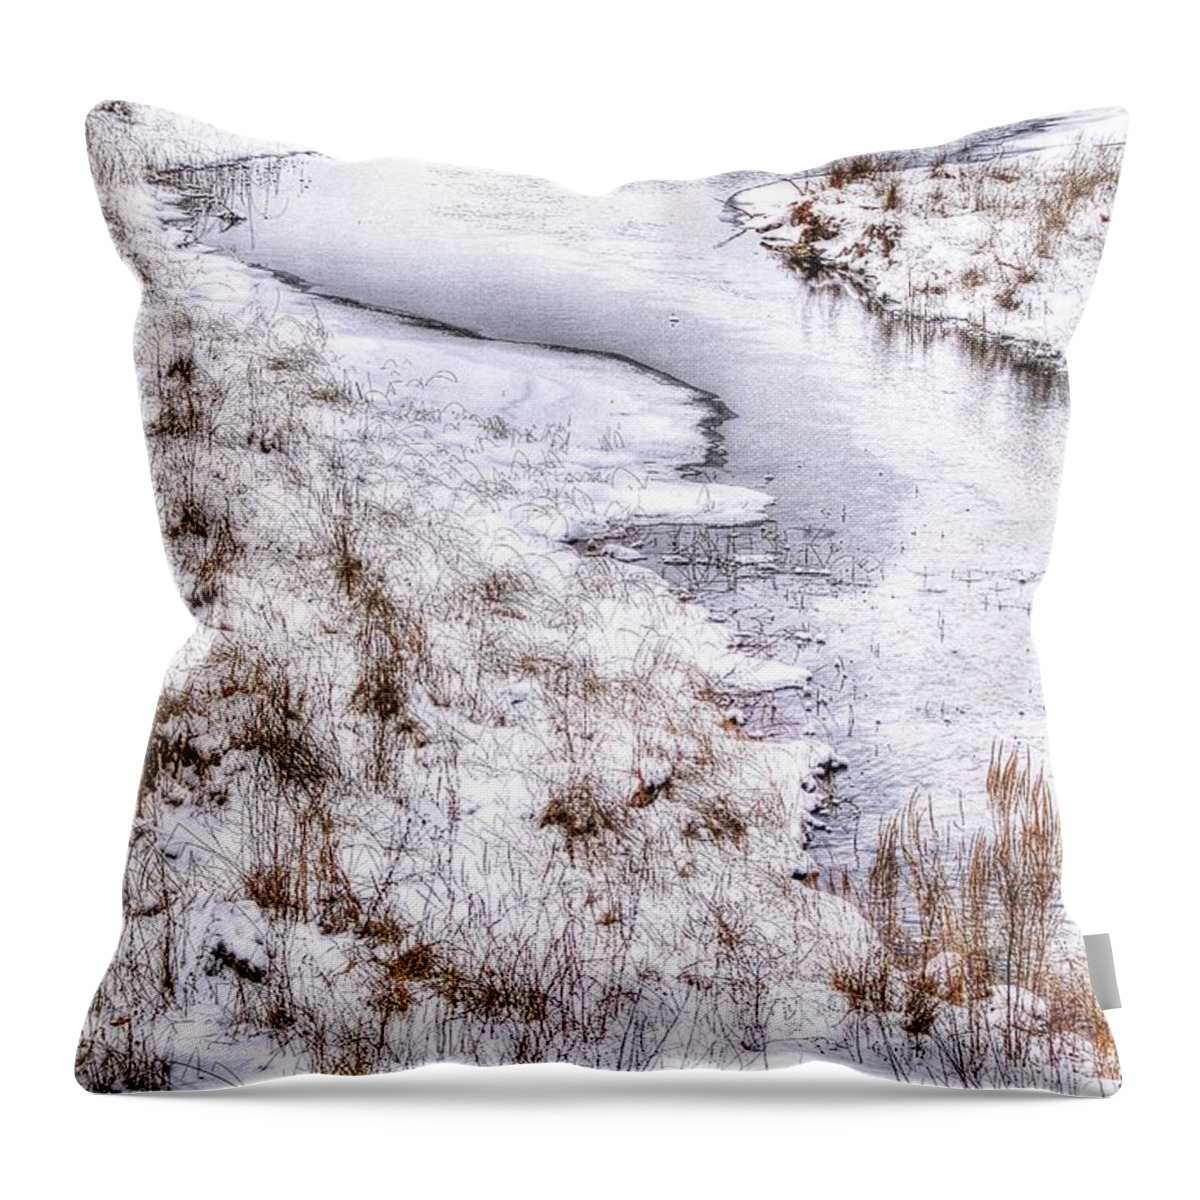  Stream Throw Pillow featuring the photograph Stream in Winter by Randy Pollard